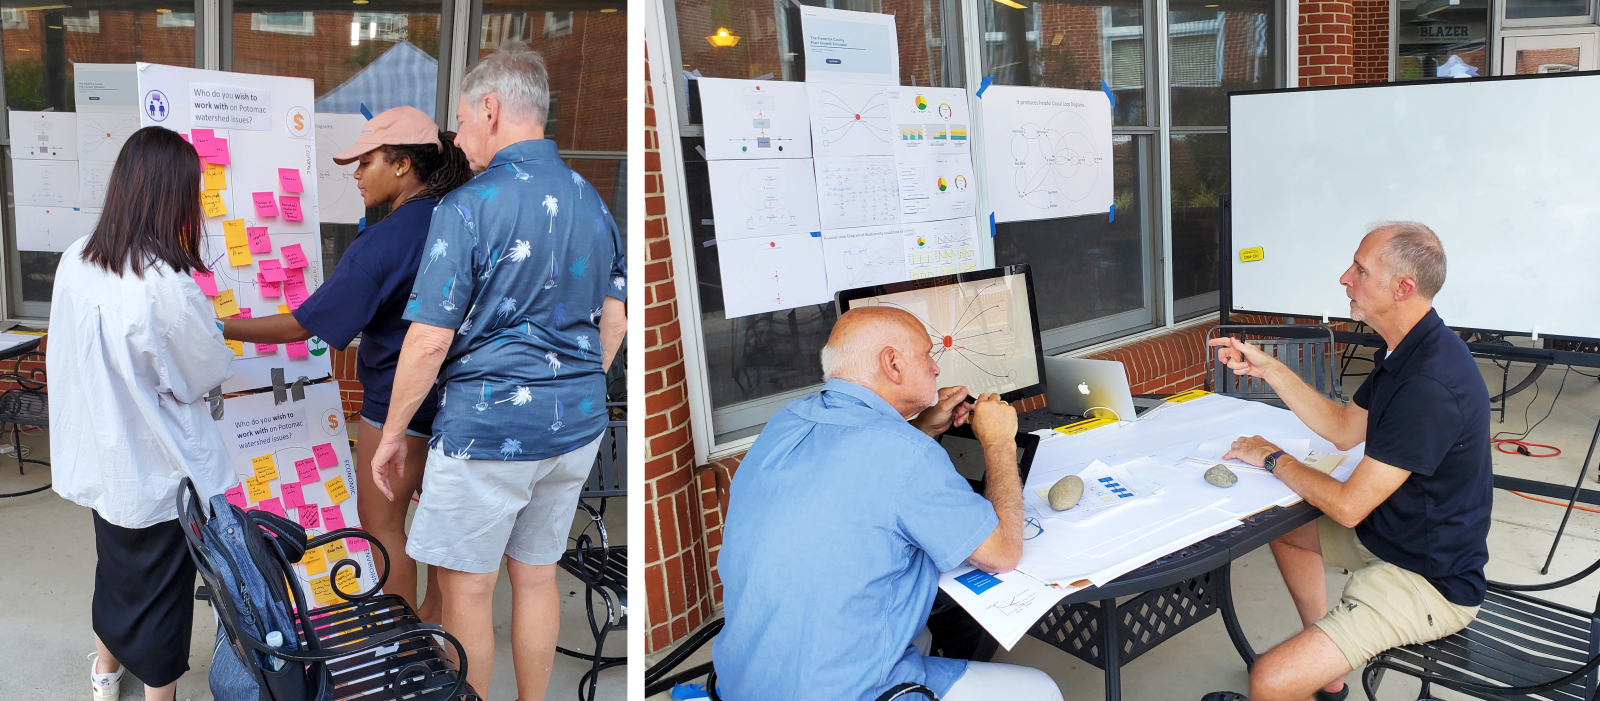 In the left image, Lawren and two participants are adding sticky notes to a poster board. In the right image, Pål is sitting at a table with a participant, engaged in conversation.